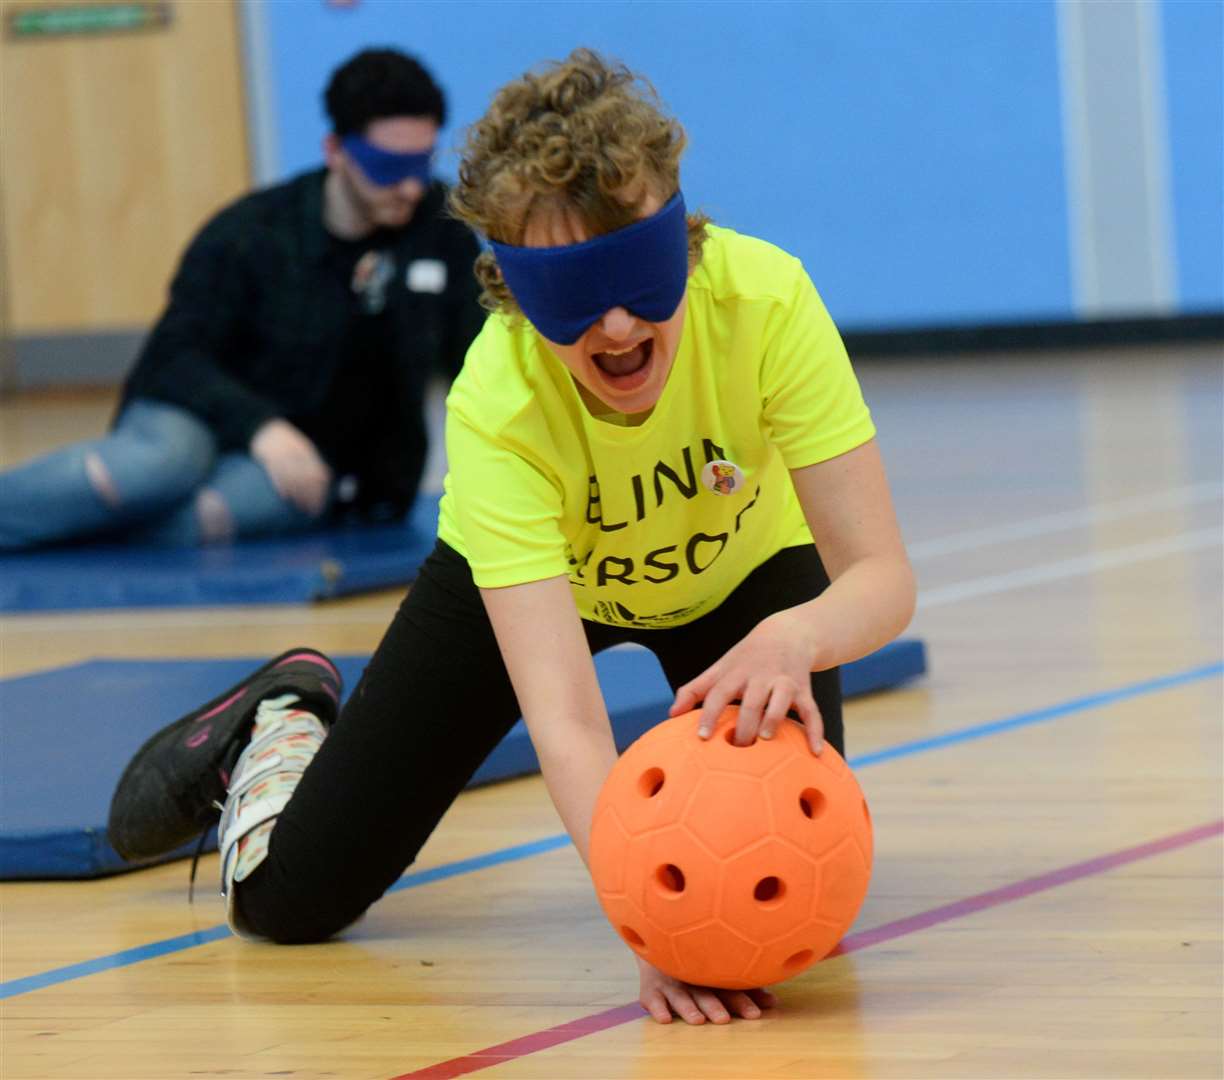 Taking part in a goalball event for the visually inpaired.